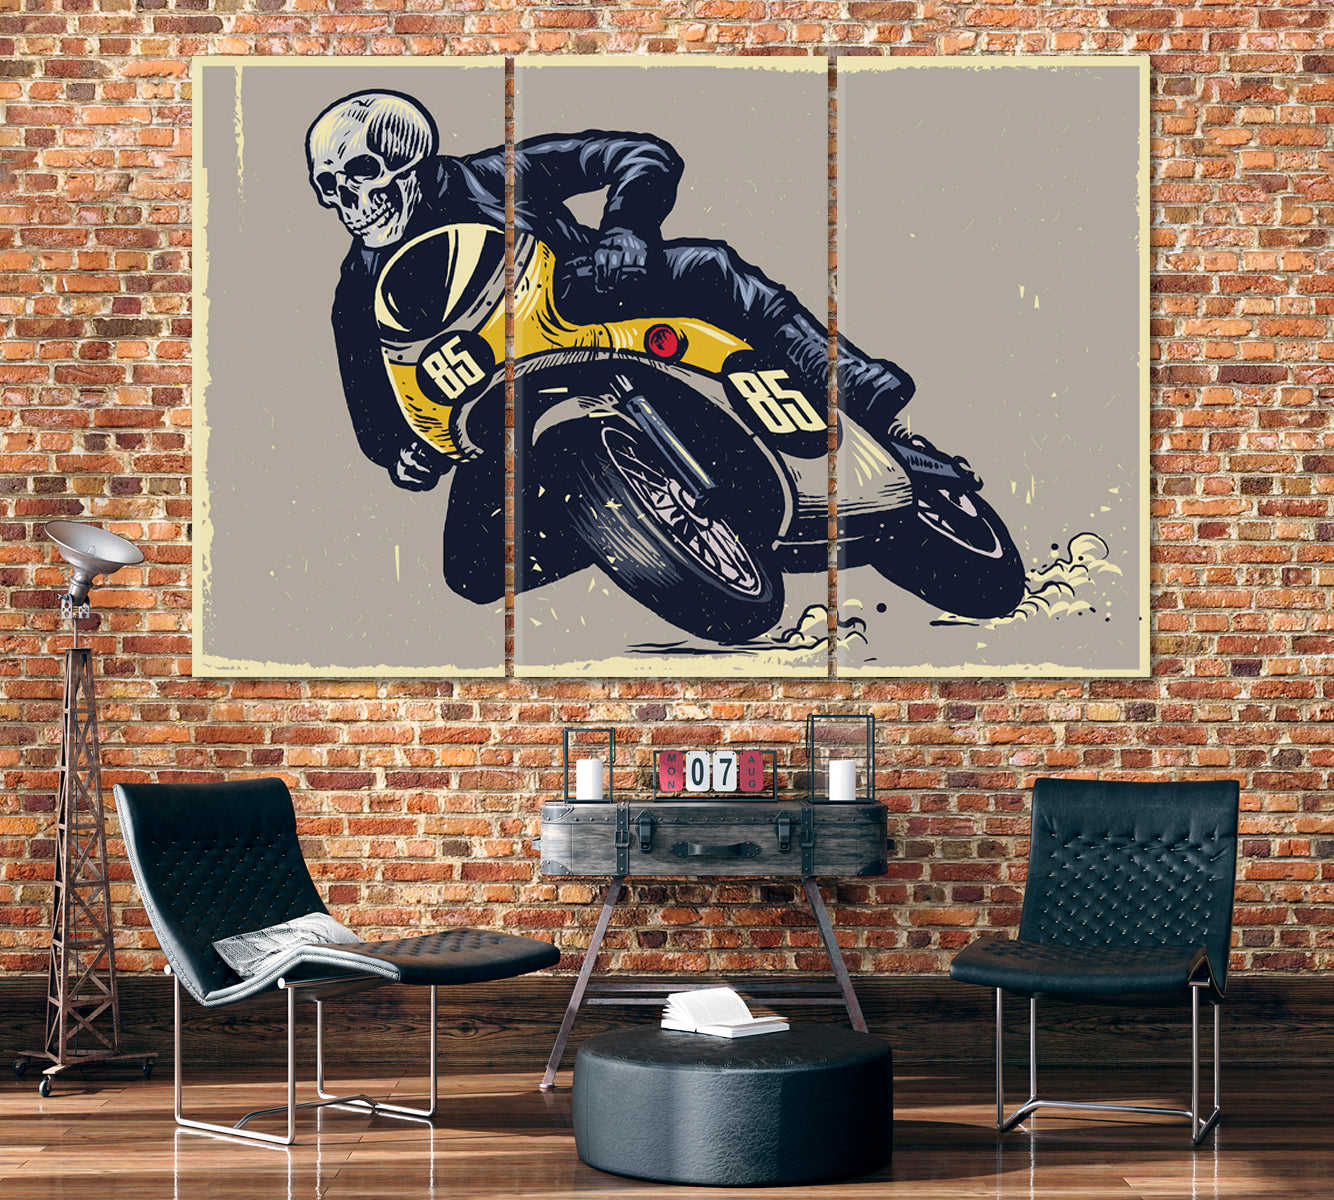 Skeleton on Motorcycle Canvas Print ArtLexy 3 Panels 36"x24" inches 